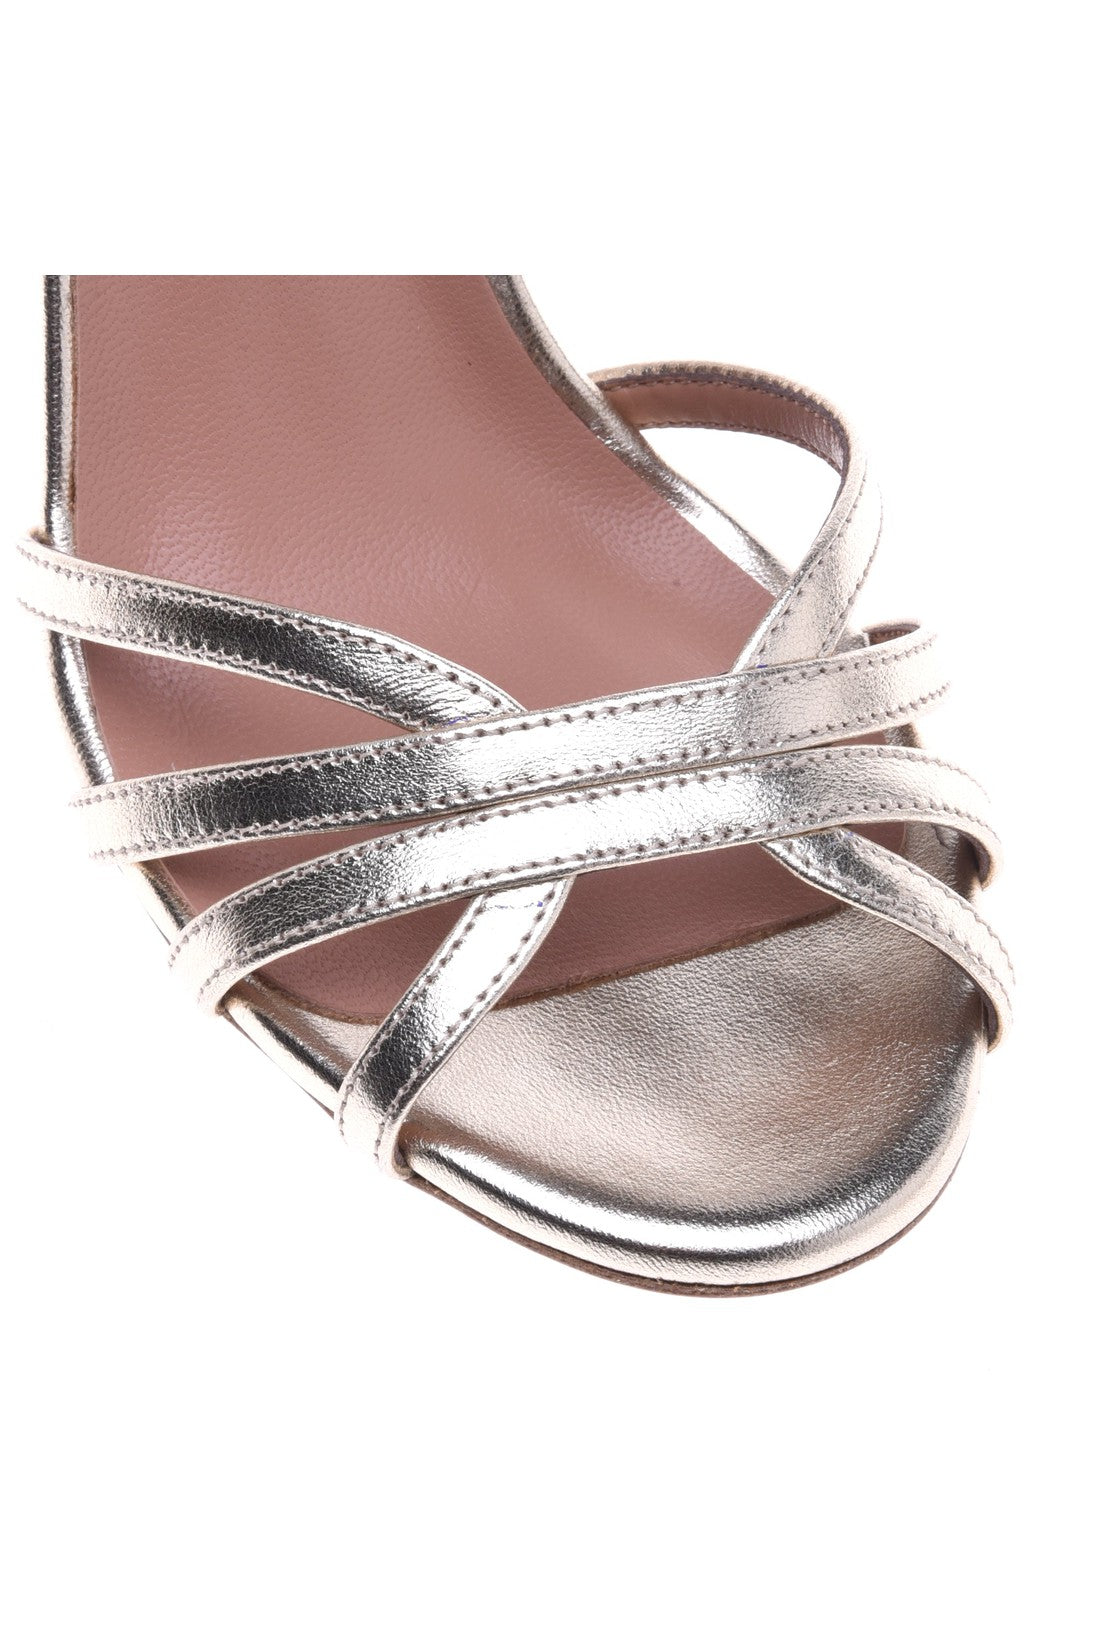 BALDININI-OUTLET-SALE-Sandal-in-laminated-platinum-nappa-leather-Sandalen-ARCHIVE-COLLECTION-4_dbf353c6-aec3-4f66-bc73-cf55425acb65.jpg